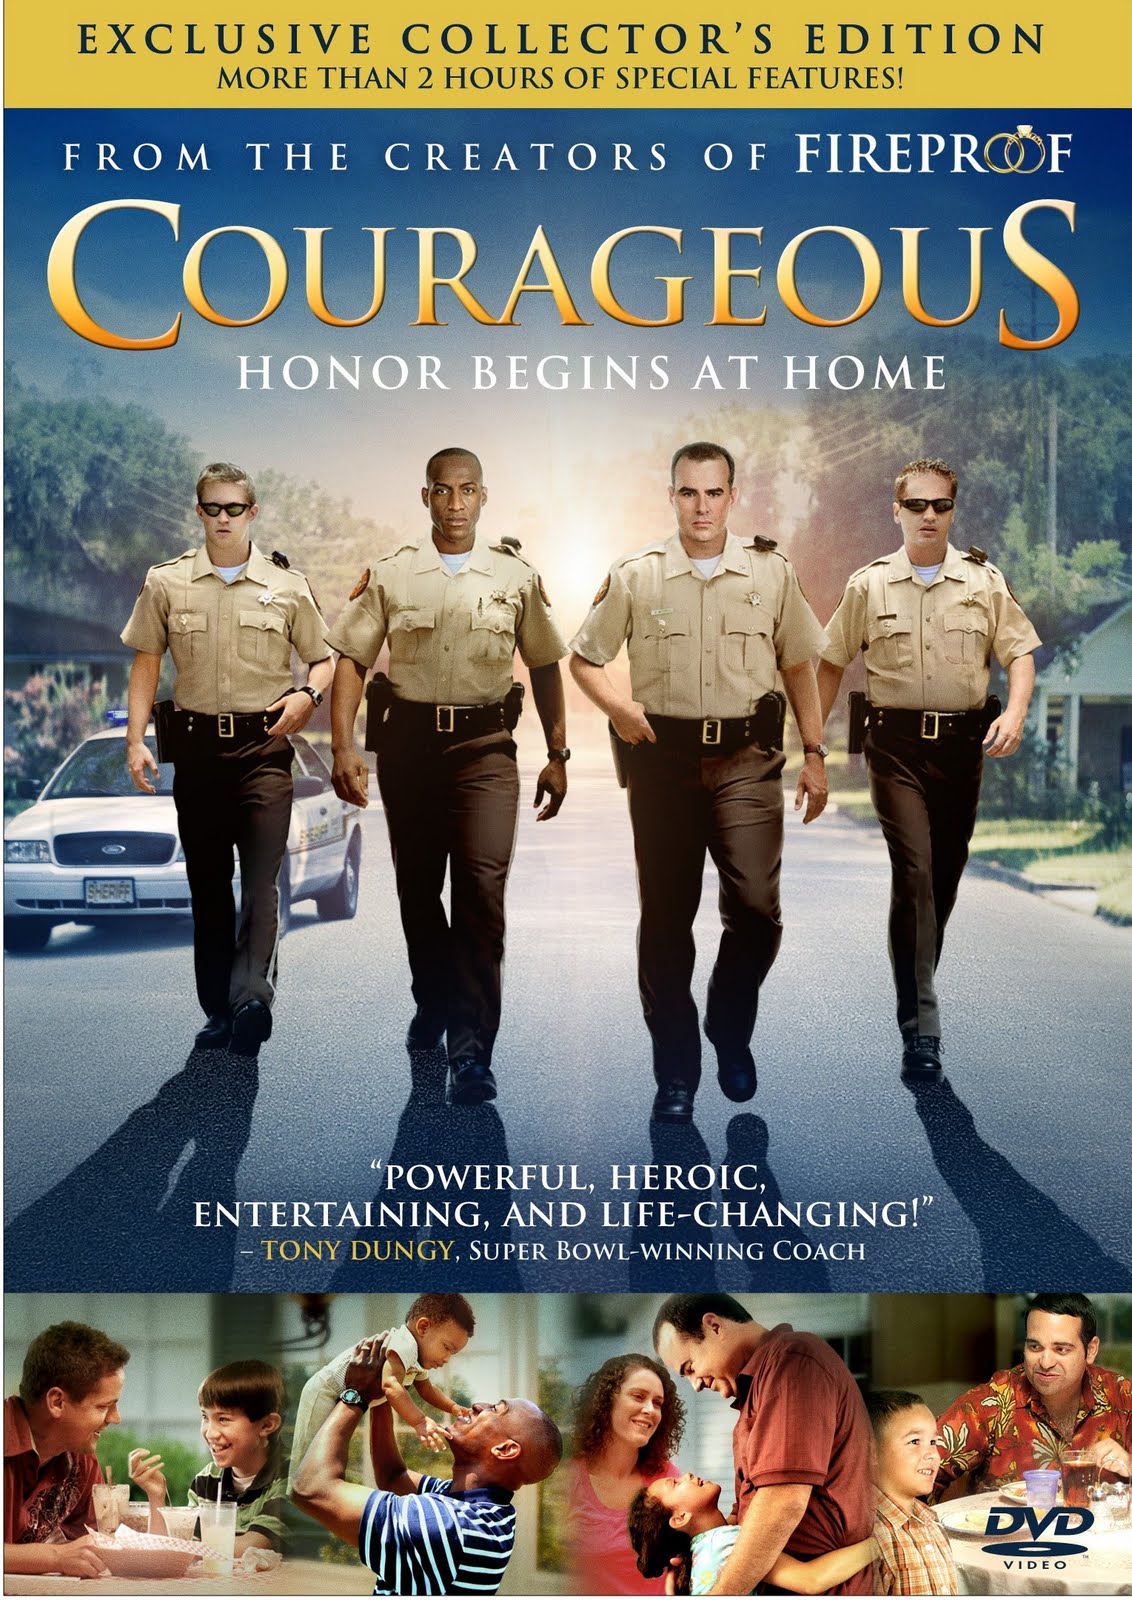 christian movie courageous full movie